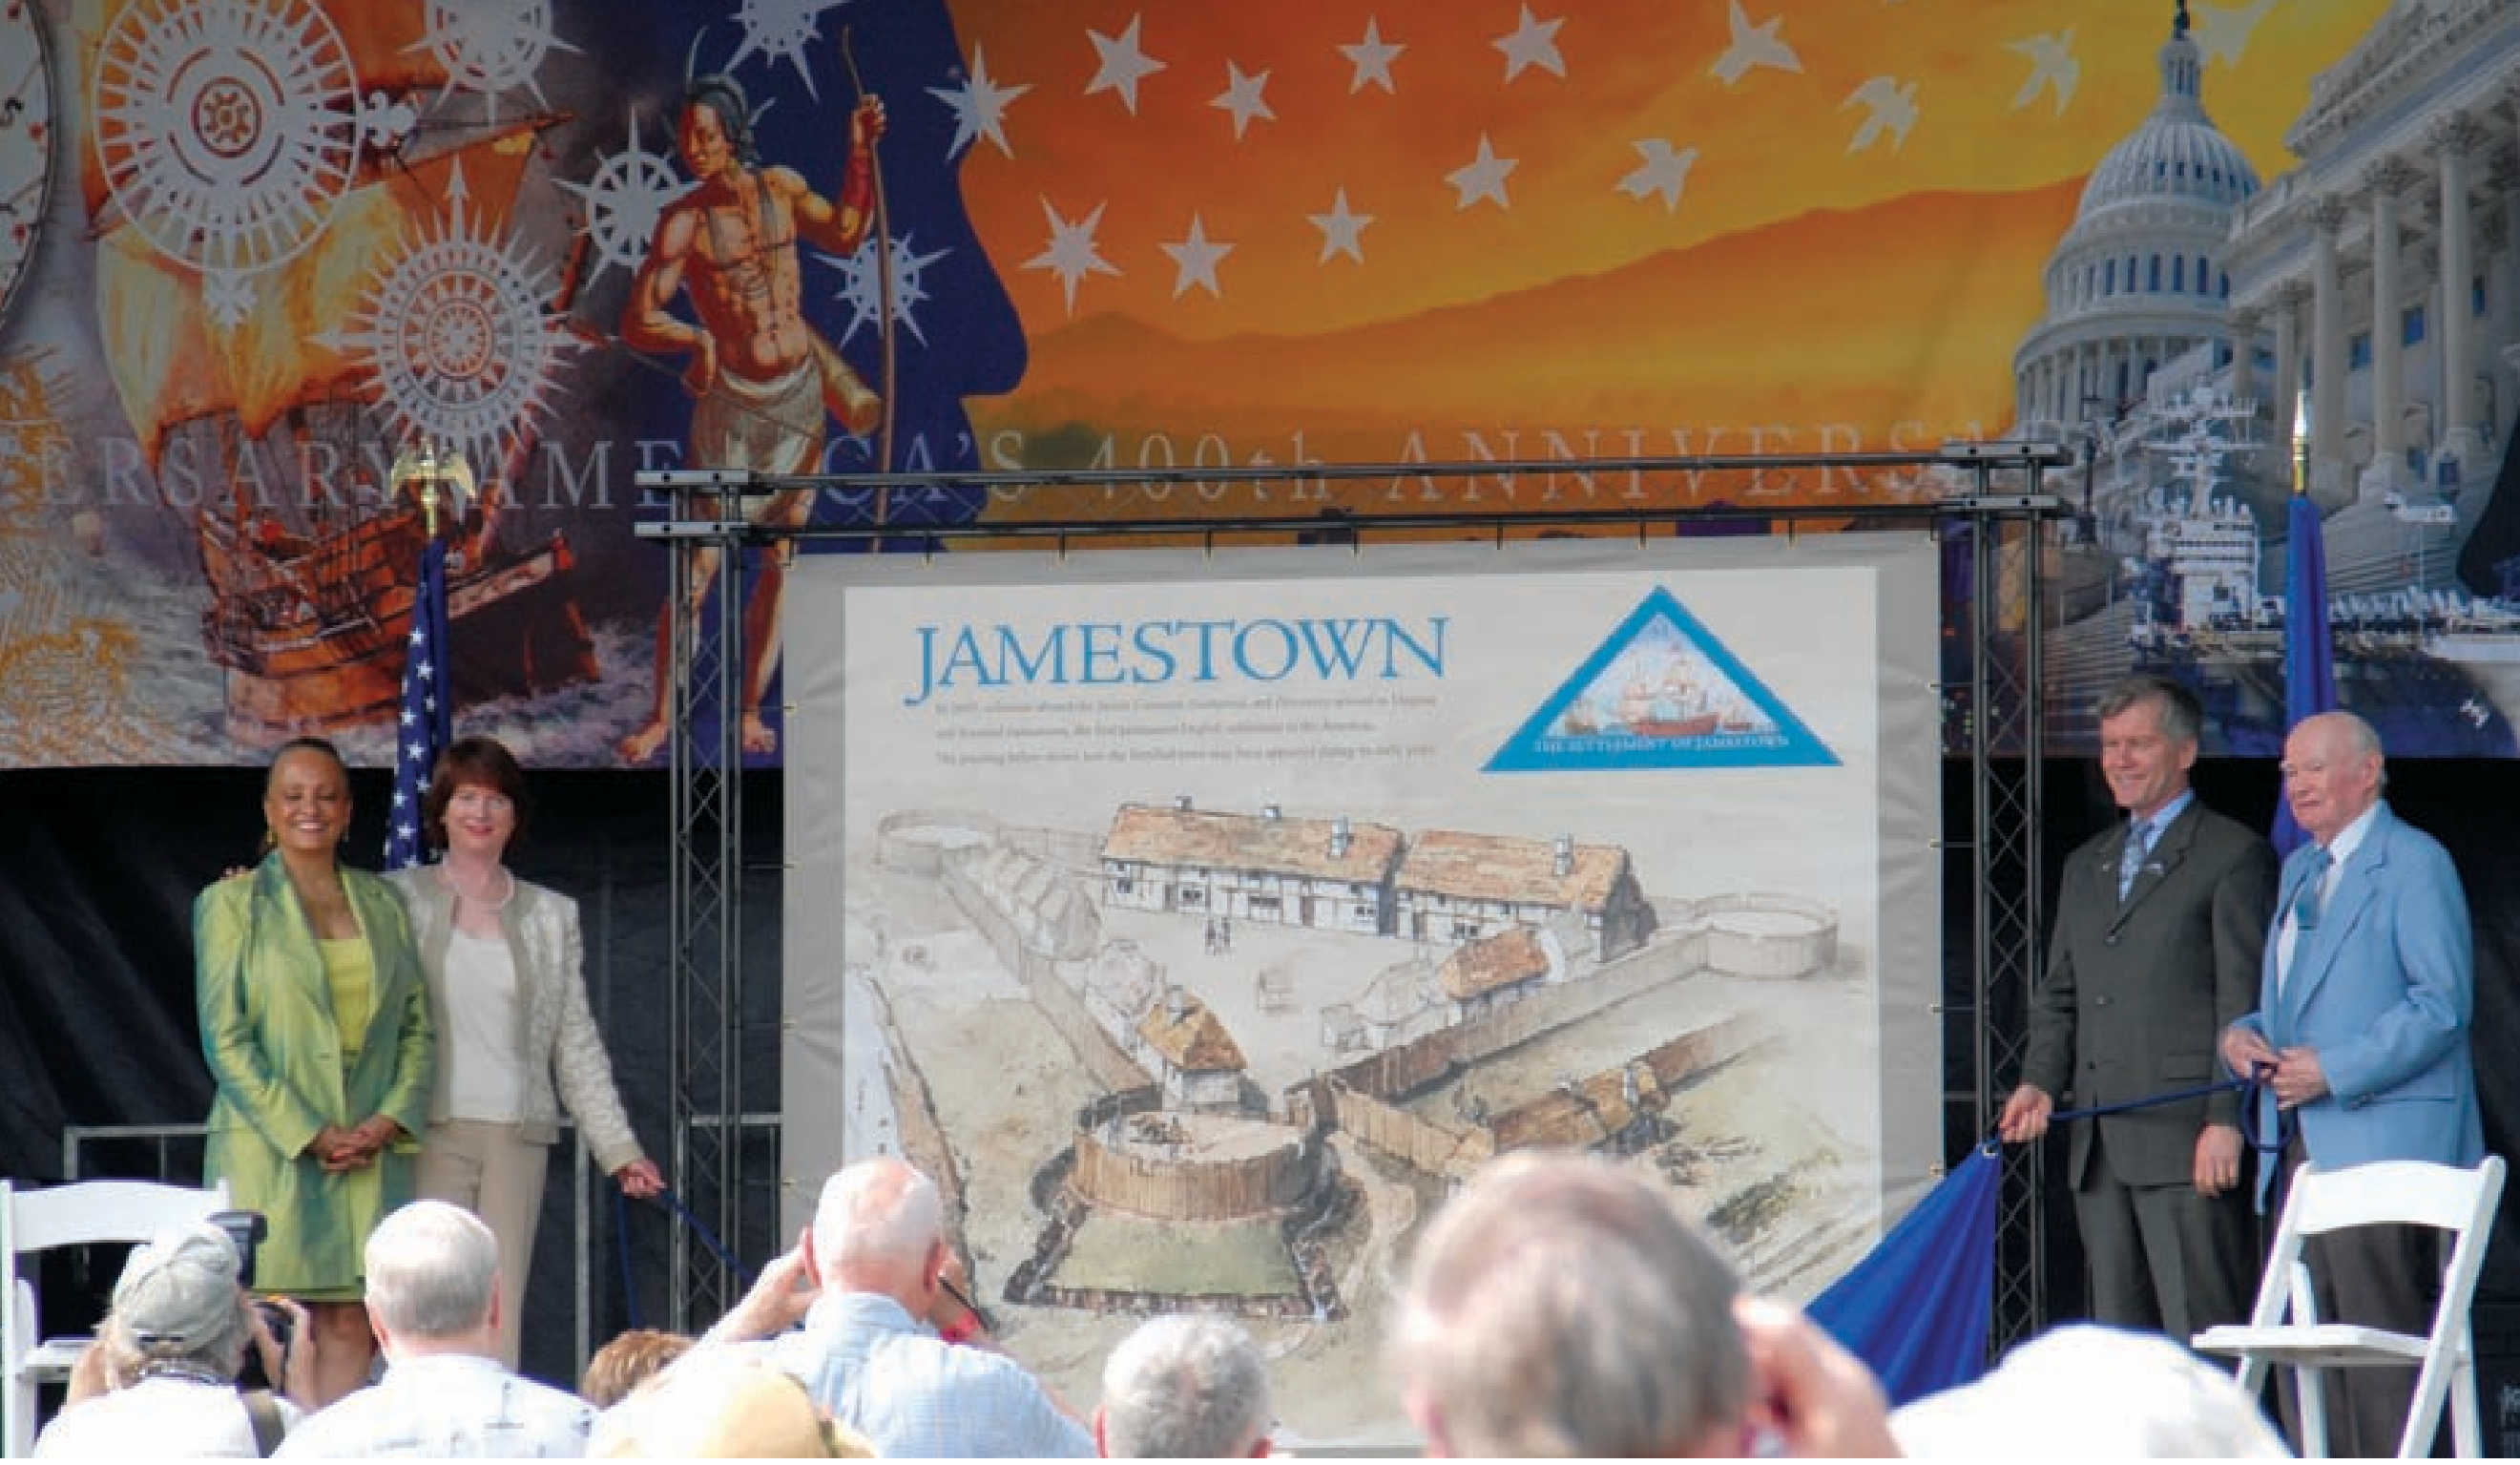 A first-day-of-issuance ceremony for the U.S. Postal Service “Settlement of Jamestown” stamp was held at Jamestown Settlement on May 11, 2007.